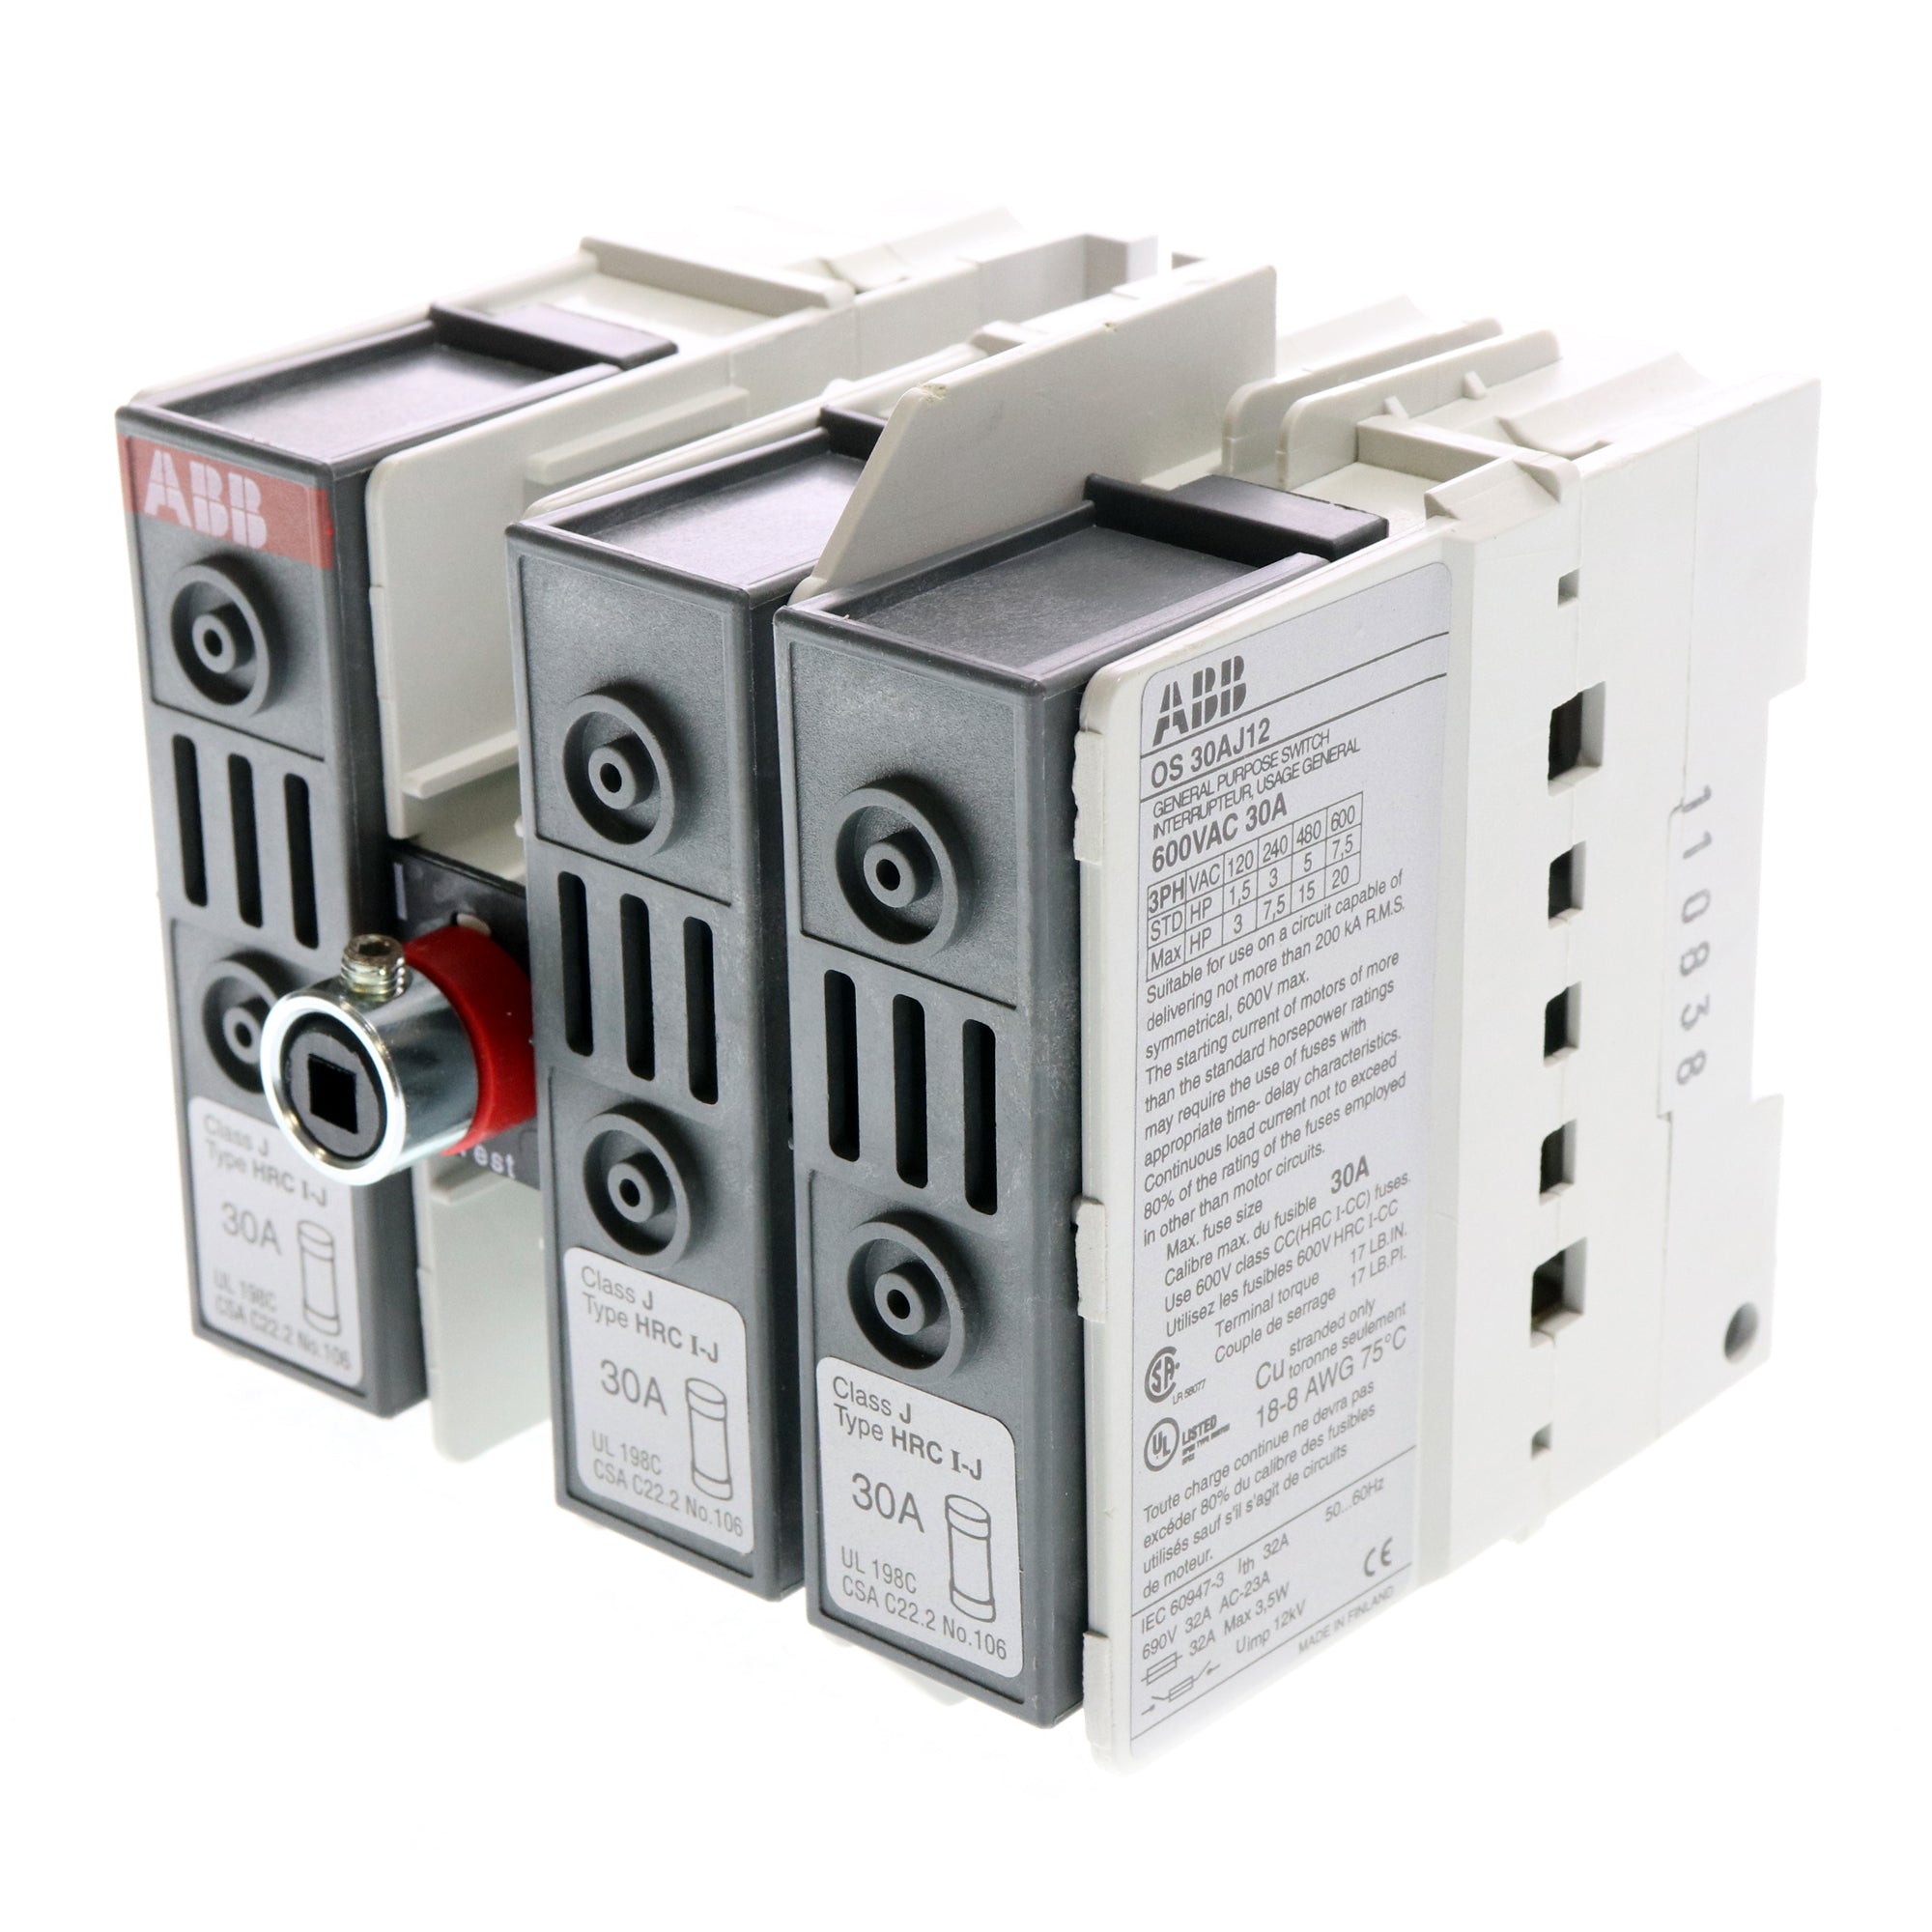 ABB Group, ABB OS-30AJ12 FUSED OPEN DISCONNECT SWITCH, 30A, 600V, CLASS J, FUSE HOLDER